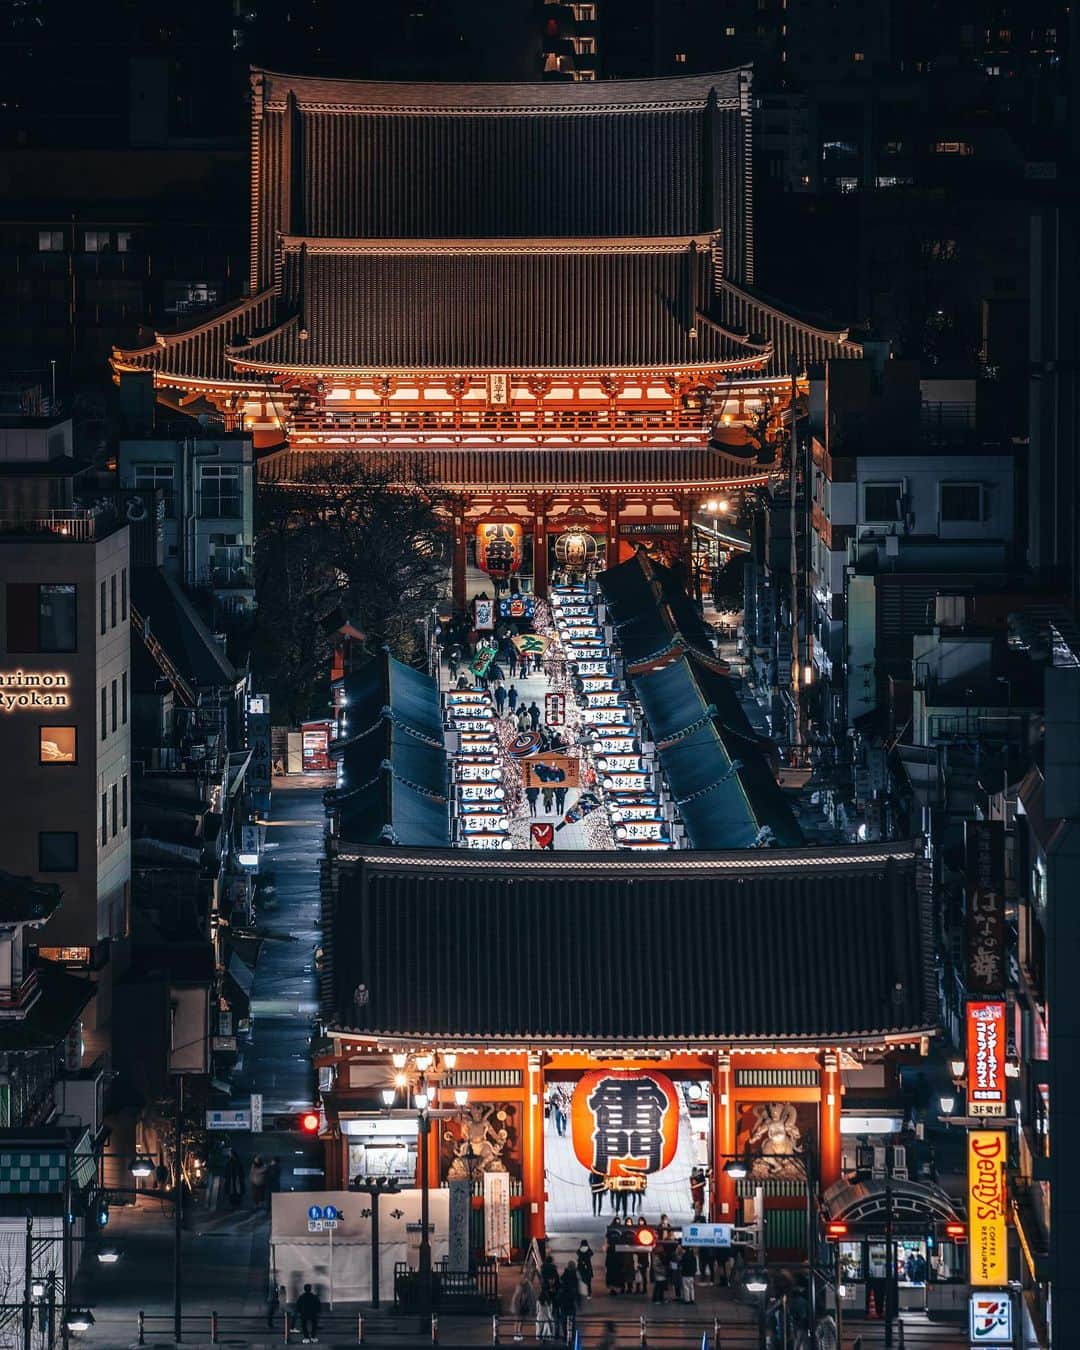 R̸K̸のインスタグラム：「By changing from the viewpoint you always see to the another viewpoint, you will find something new. What can you see from this landscape? #hellofrom Asakusa Tokyo ・ ・ ・ ・ #beautifuldestinations #earthfocus #earthoffcial #earthpix #thegreatplanet #discoverearth #fantastic_earth #awesome_earthpix #ourplanetdaily #visualambassadors #stayandwander #awesome_photographers #IamATraveler #wonderful_places #TLPics #depthobsessed #designboom #voyaged #sonyalpha #bealpha  #streets_vision #complexphotos #d_signers #lonelyplanet #luxuryworldtraveler #onlyforluxury #nightphotography #bbctravel #lovetheworld @sonyalpha  @lightroom @soul.planet @earthfever @9gag @500px @paradise @mega_mansions @natgeotravel @awesome.earth」